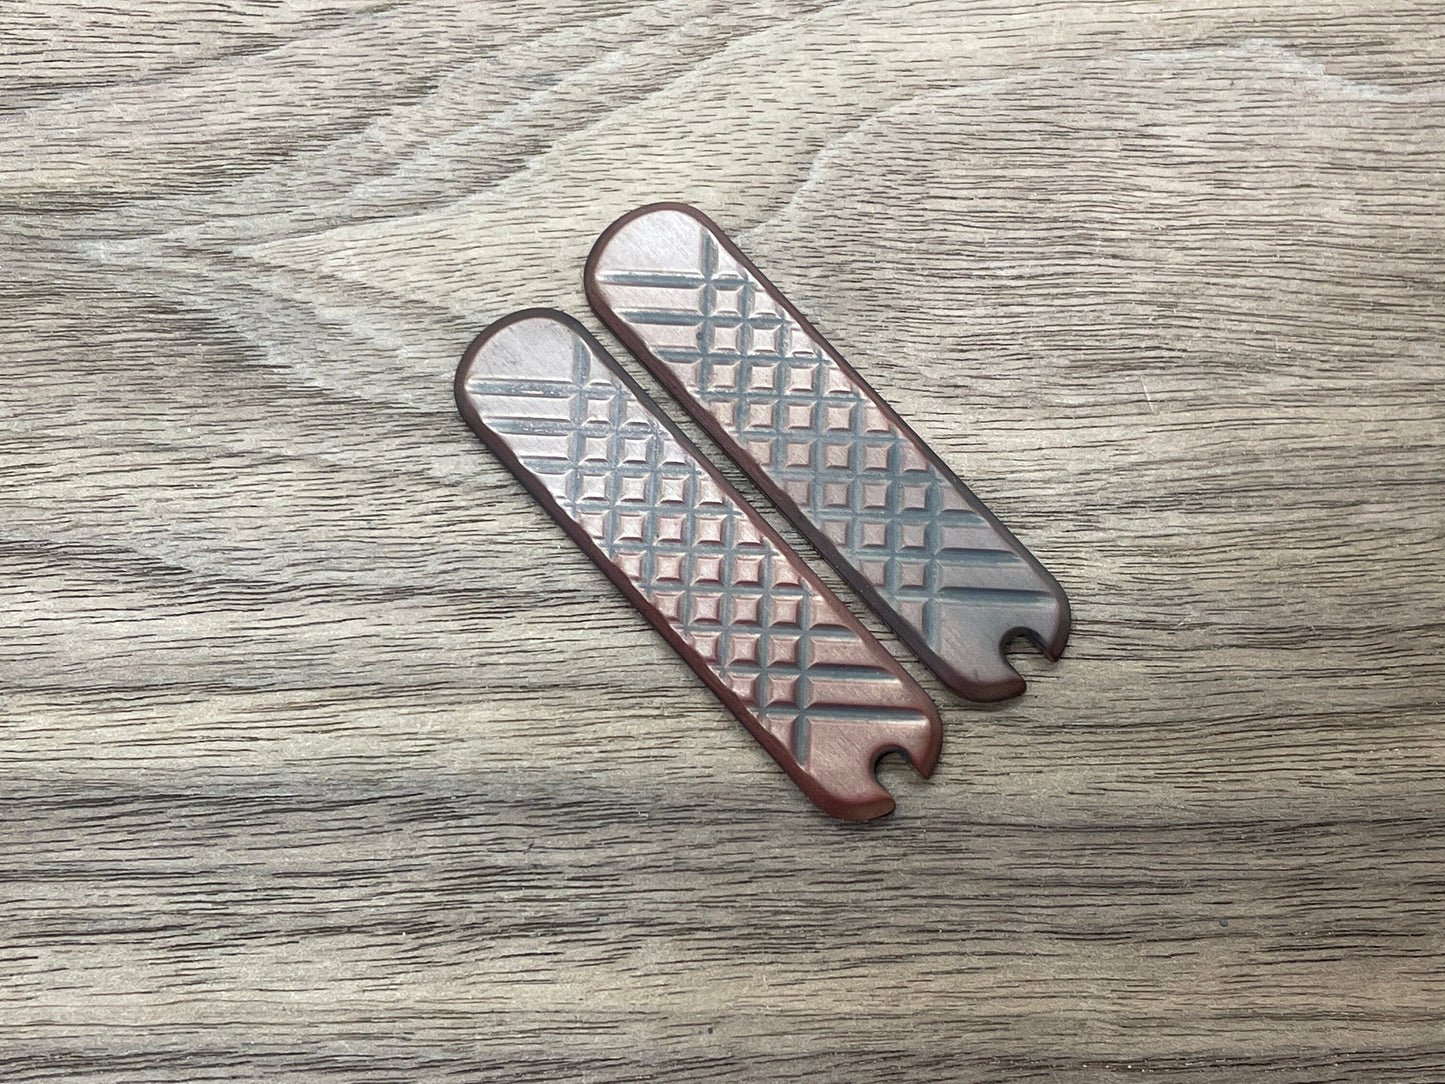 58mm FRAG Medieval Copper Scales for Swiss Army SAK